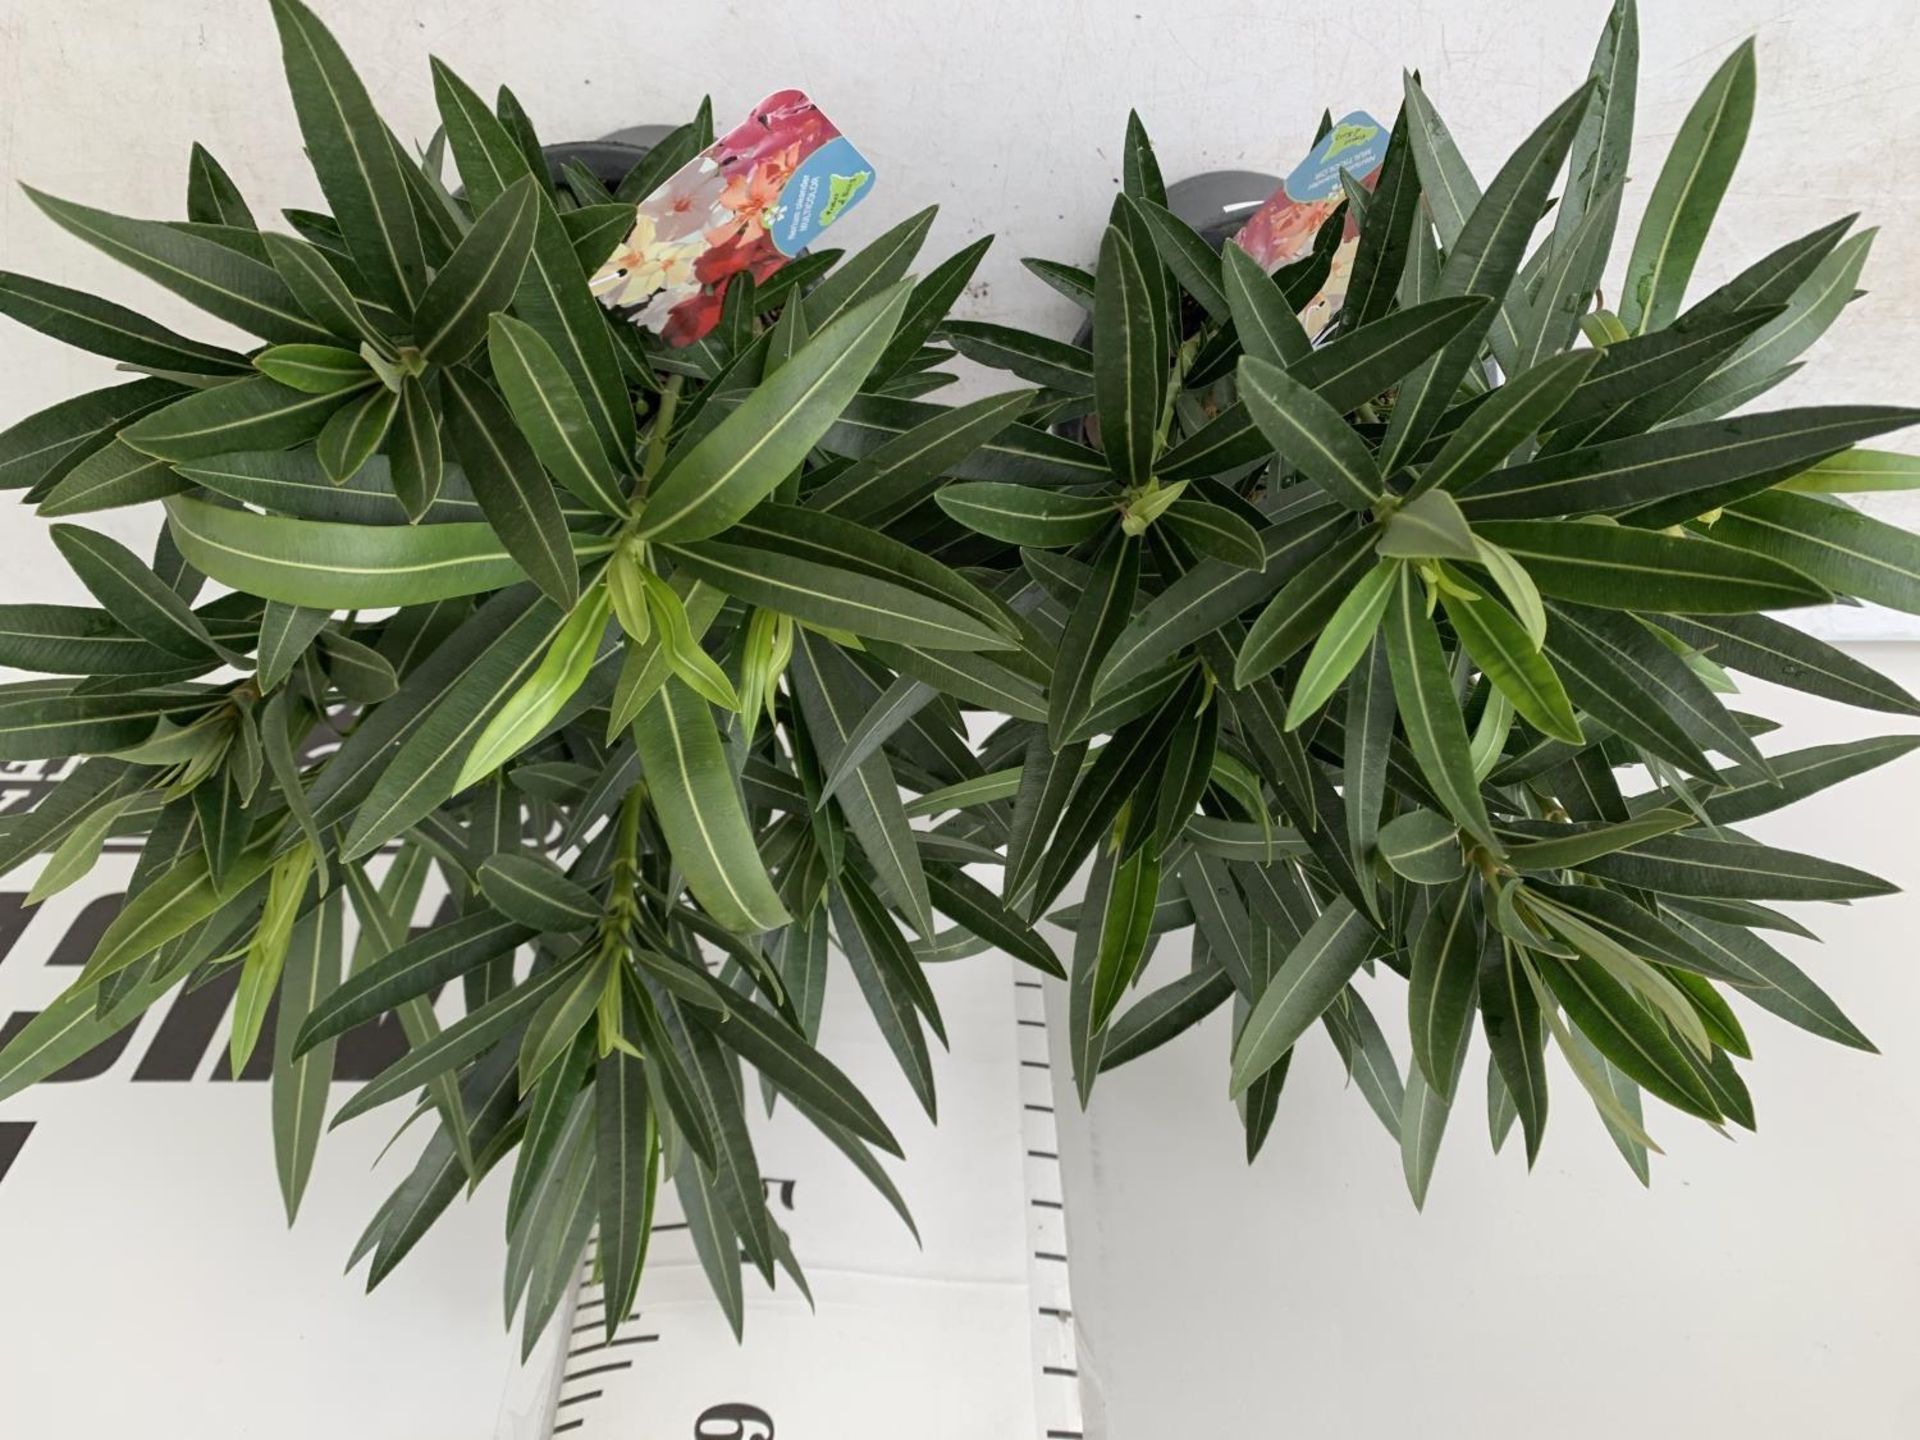 TWO OLEANDER NERIUM SHRUBS MULTICOLOURED APPROX 60CM TALL IN 4 LTR POTS PLUS VAT TO BE SOLD FOR - Image 6 of 20